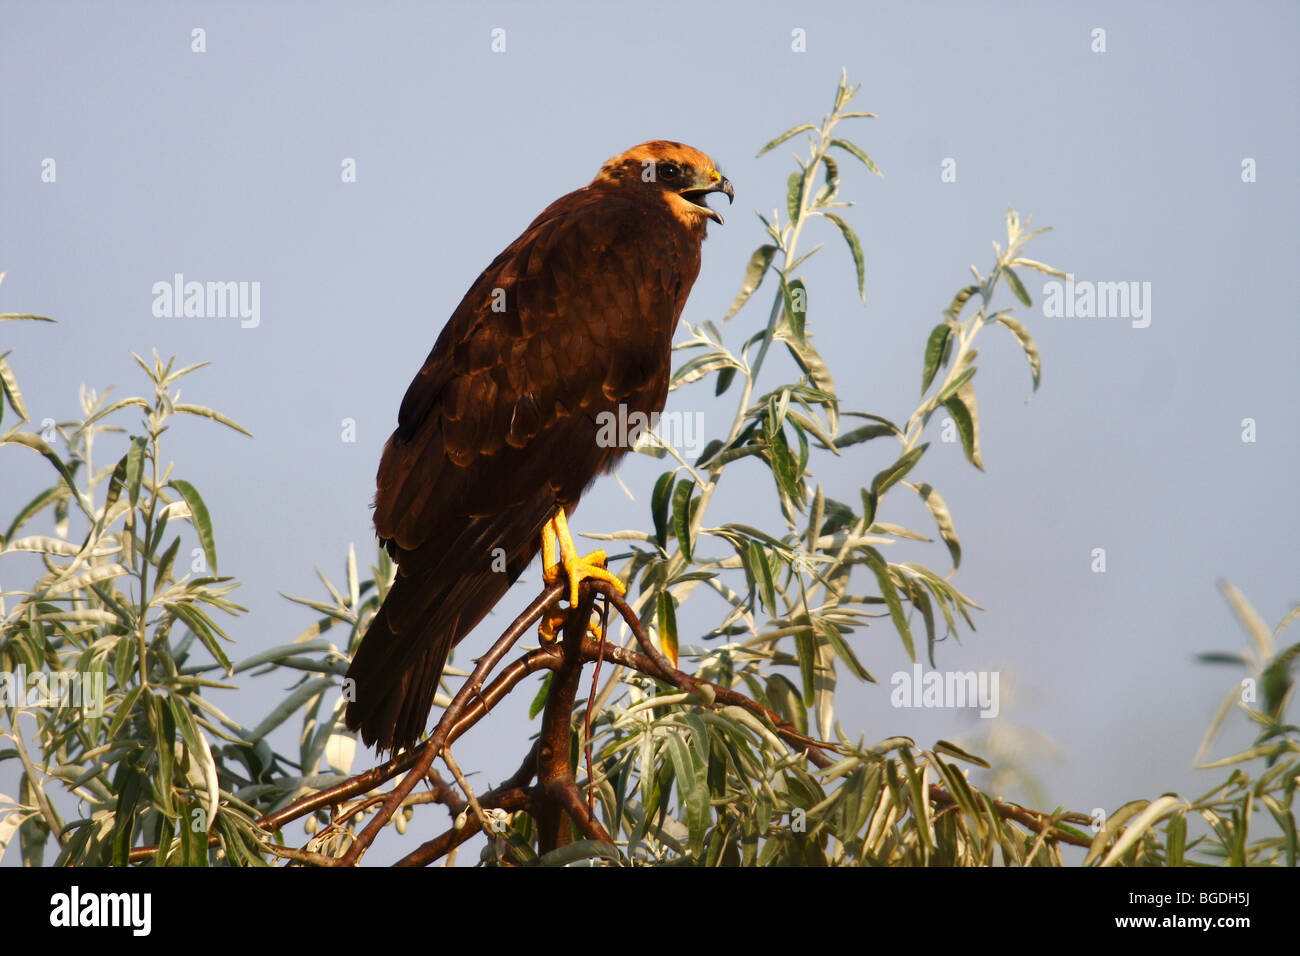 Marsh Harrier (Circus aeruginosus), young bird calling while perched on a branch, Lake Neusiedl, Burgenland, Austria, Europe Stock Photo